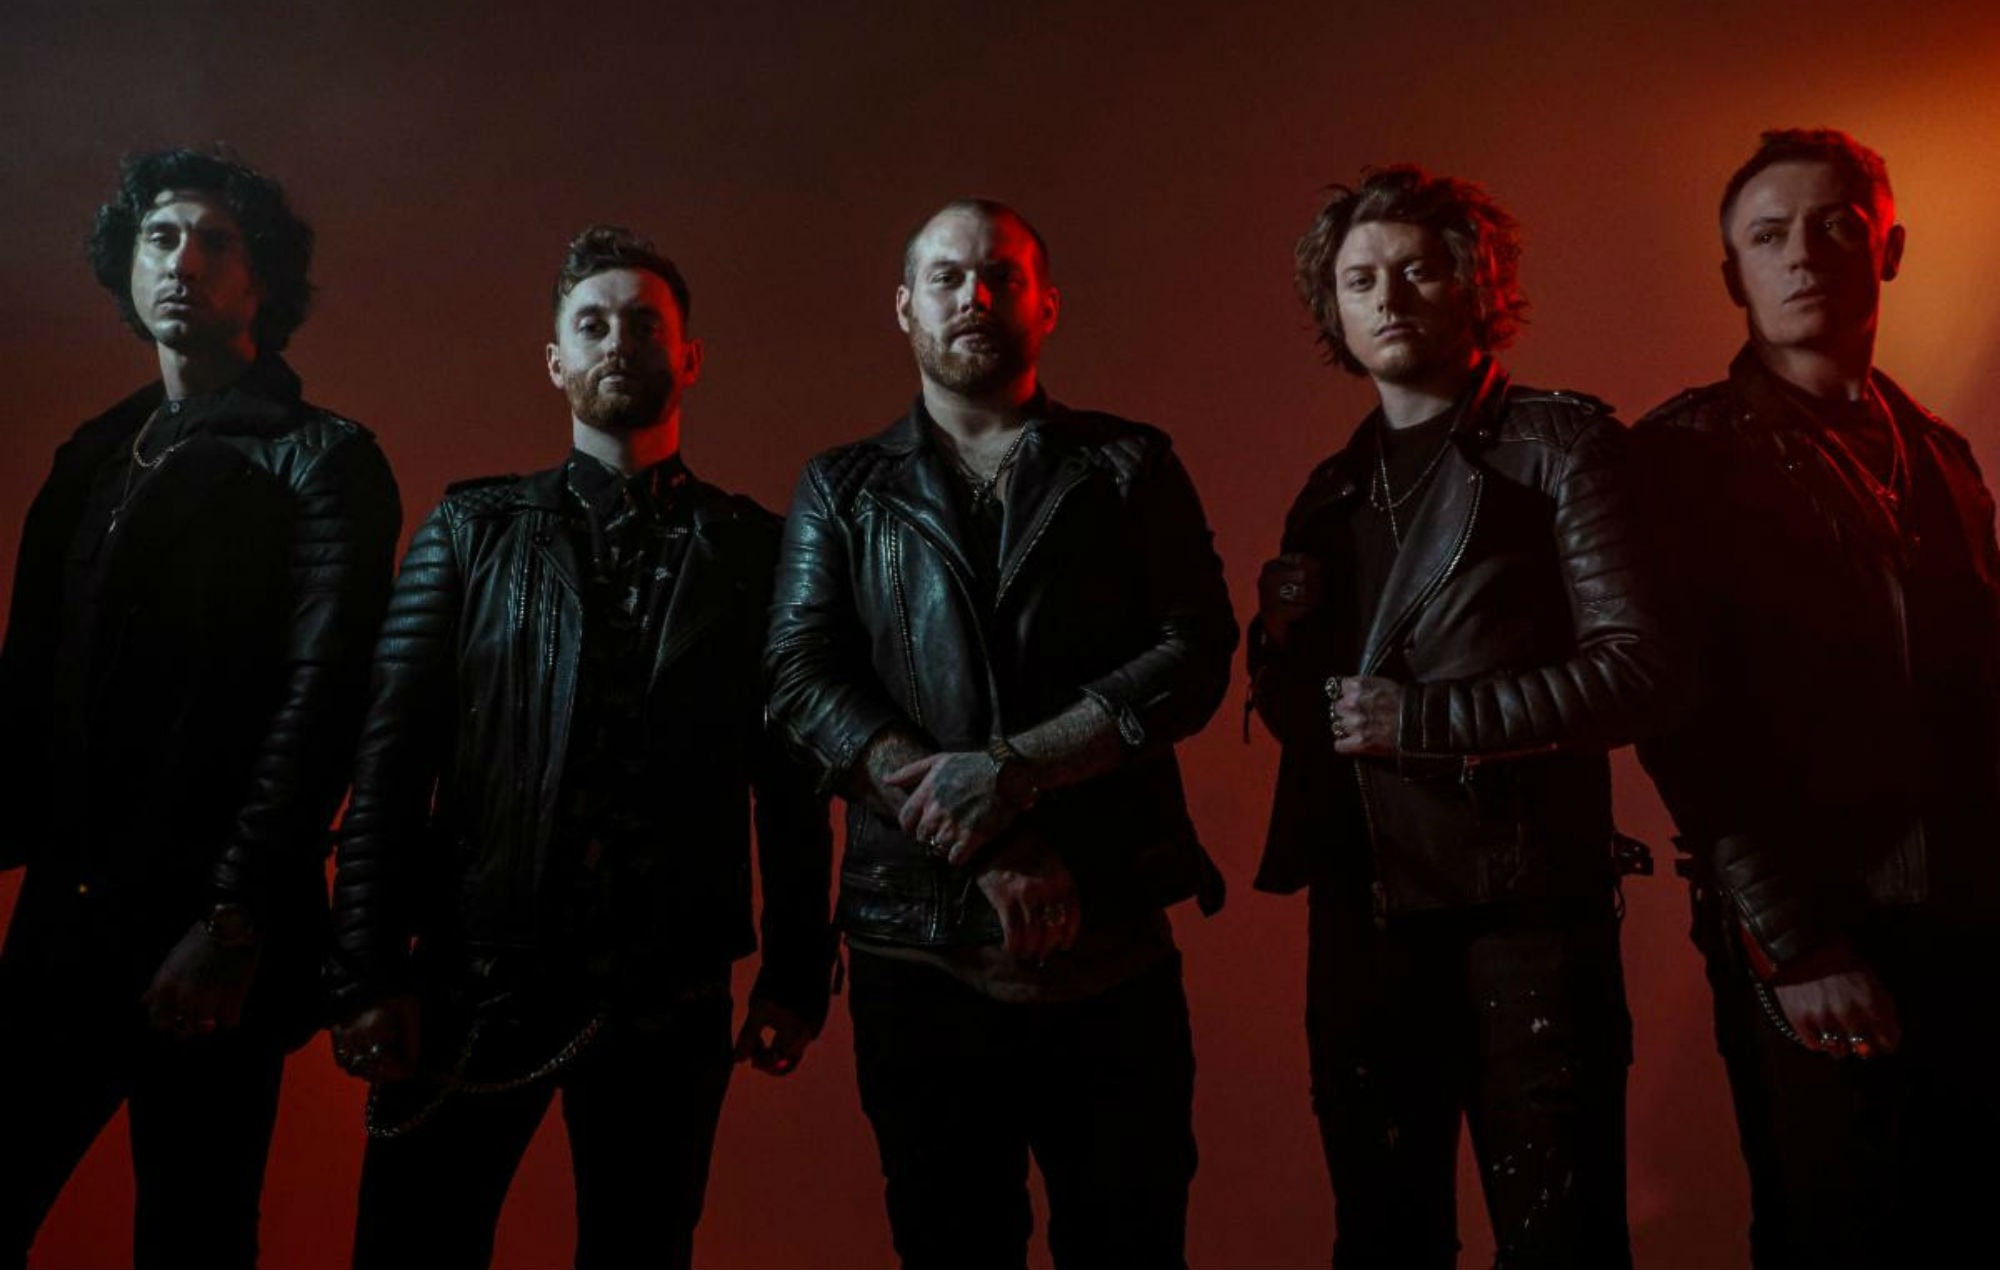 Asking Alexandria: “Corey Taylor told us this record would piss people off”